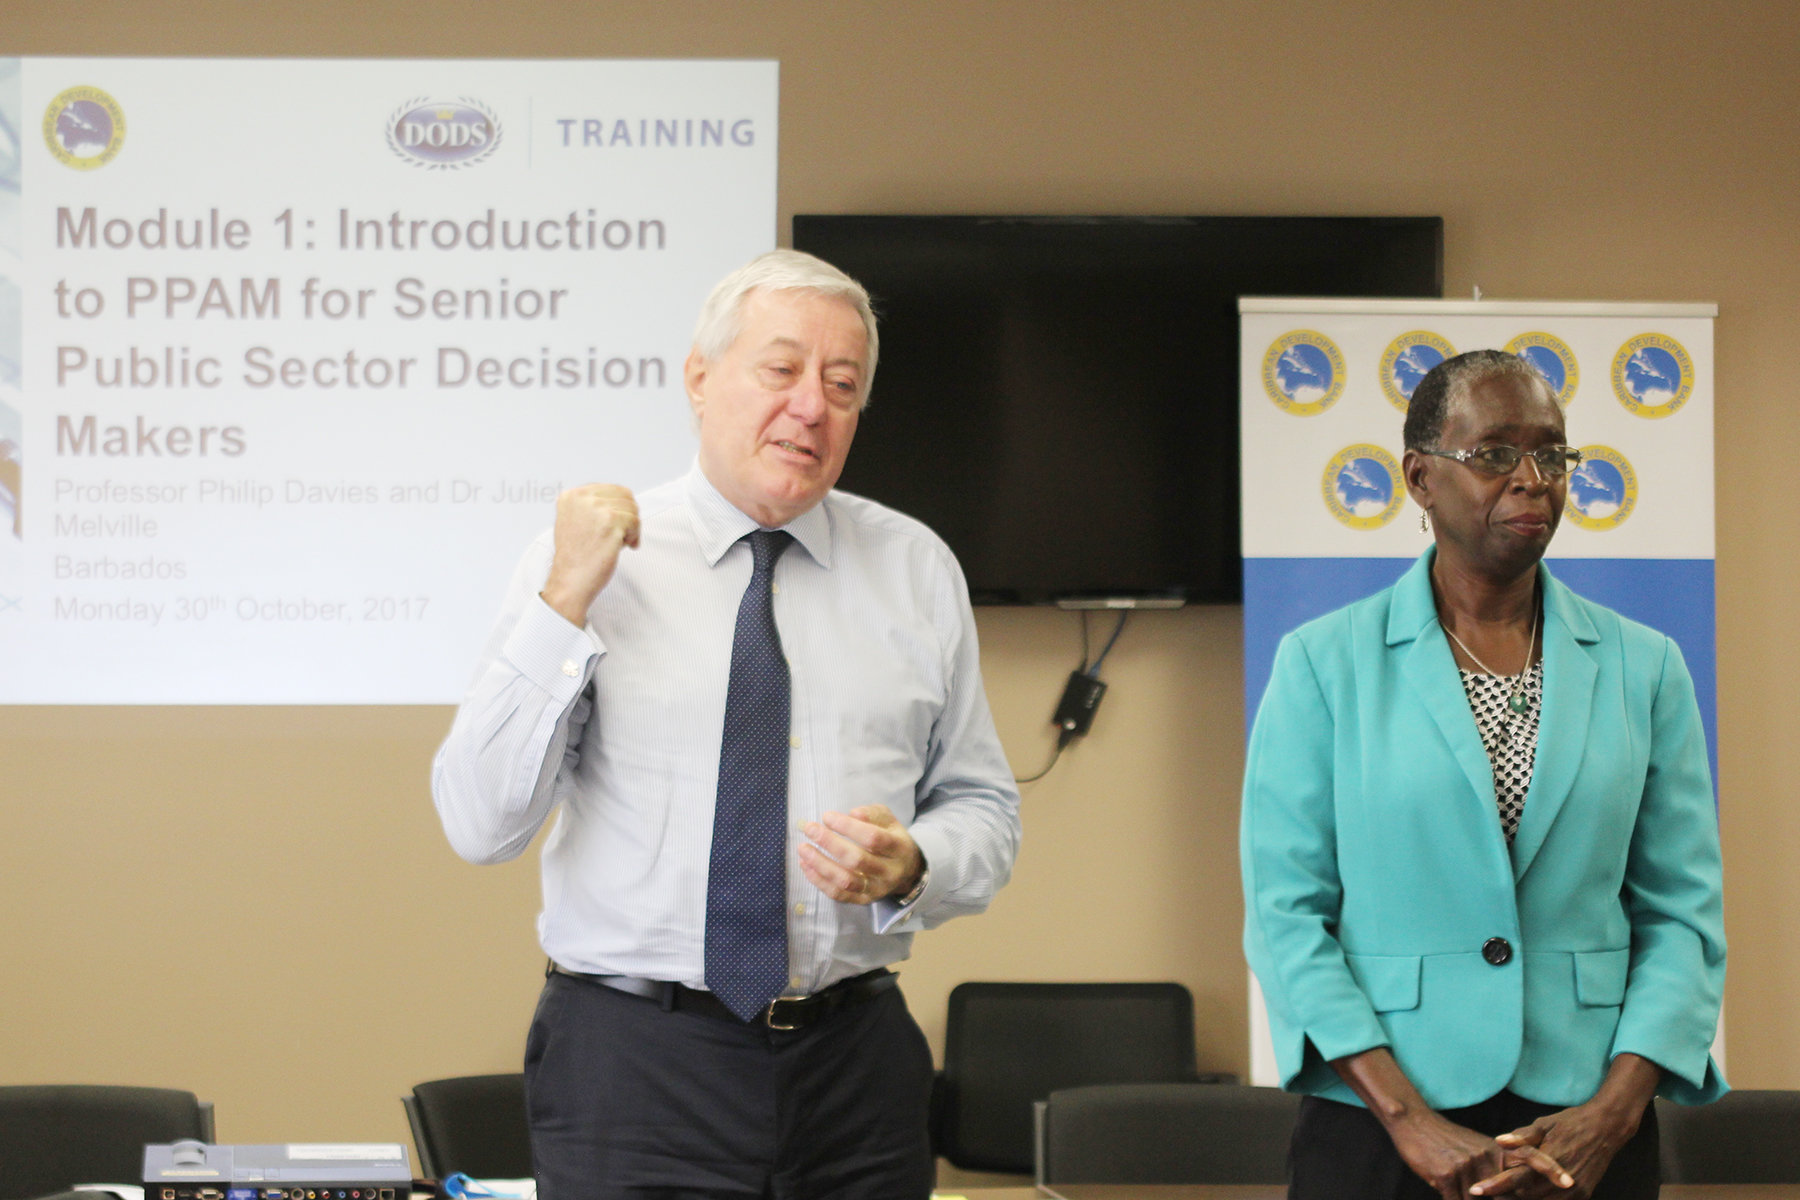 Professor Philip Davies and Dr. Juliet Melville delivering training in Barbados.